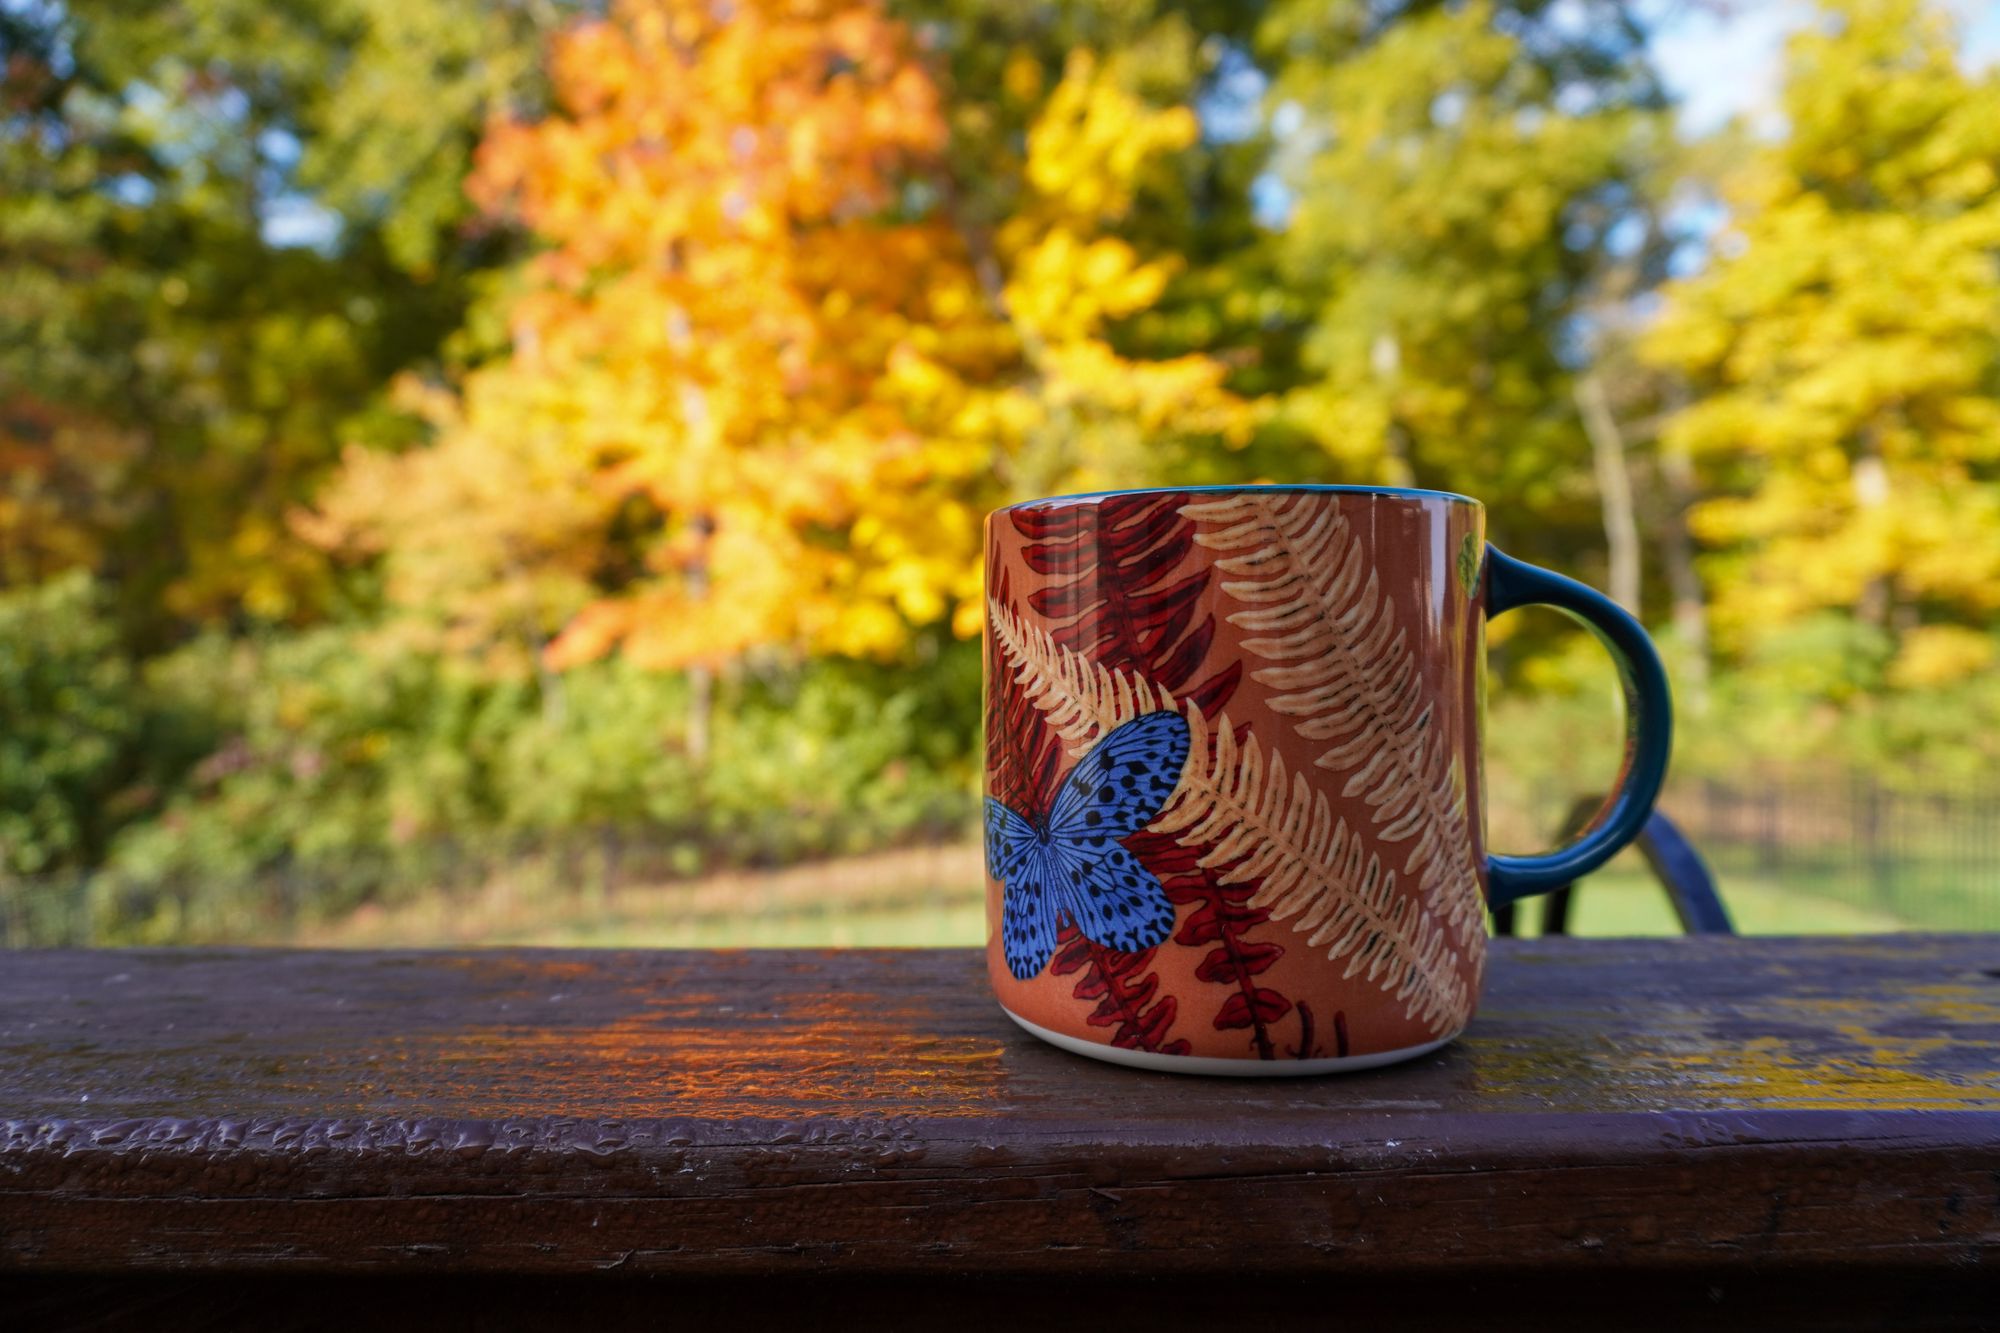 coffee mug (decorated with autumnal foliage and a blue butterfly) sitting on the deck railing in front of a vibrant line of yellow and orange trees